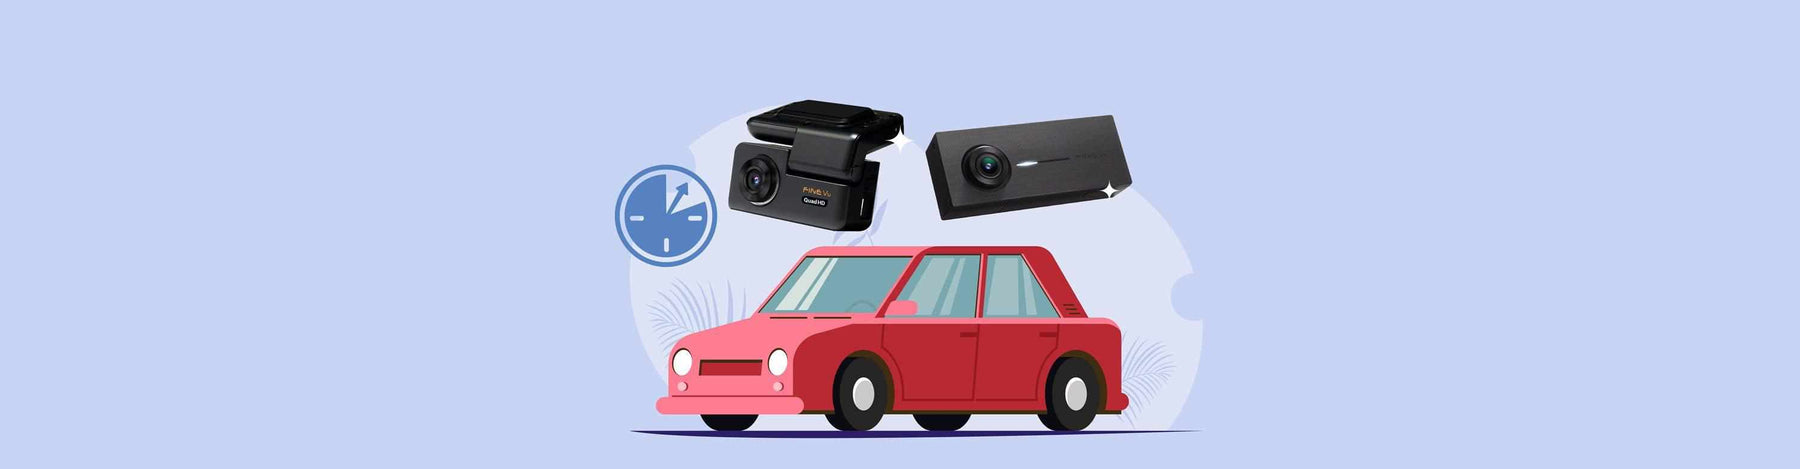 Record 5X More Footage and Details with the FineVu GX33 and GX300 Dash Cams - - BlackboxMyCar Canada